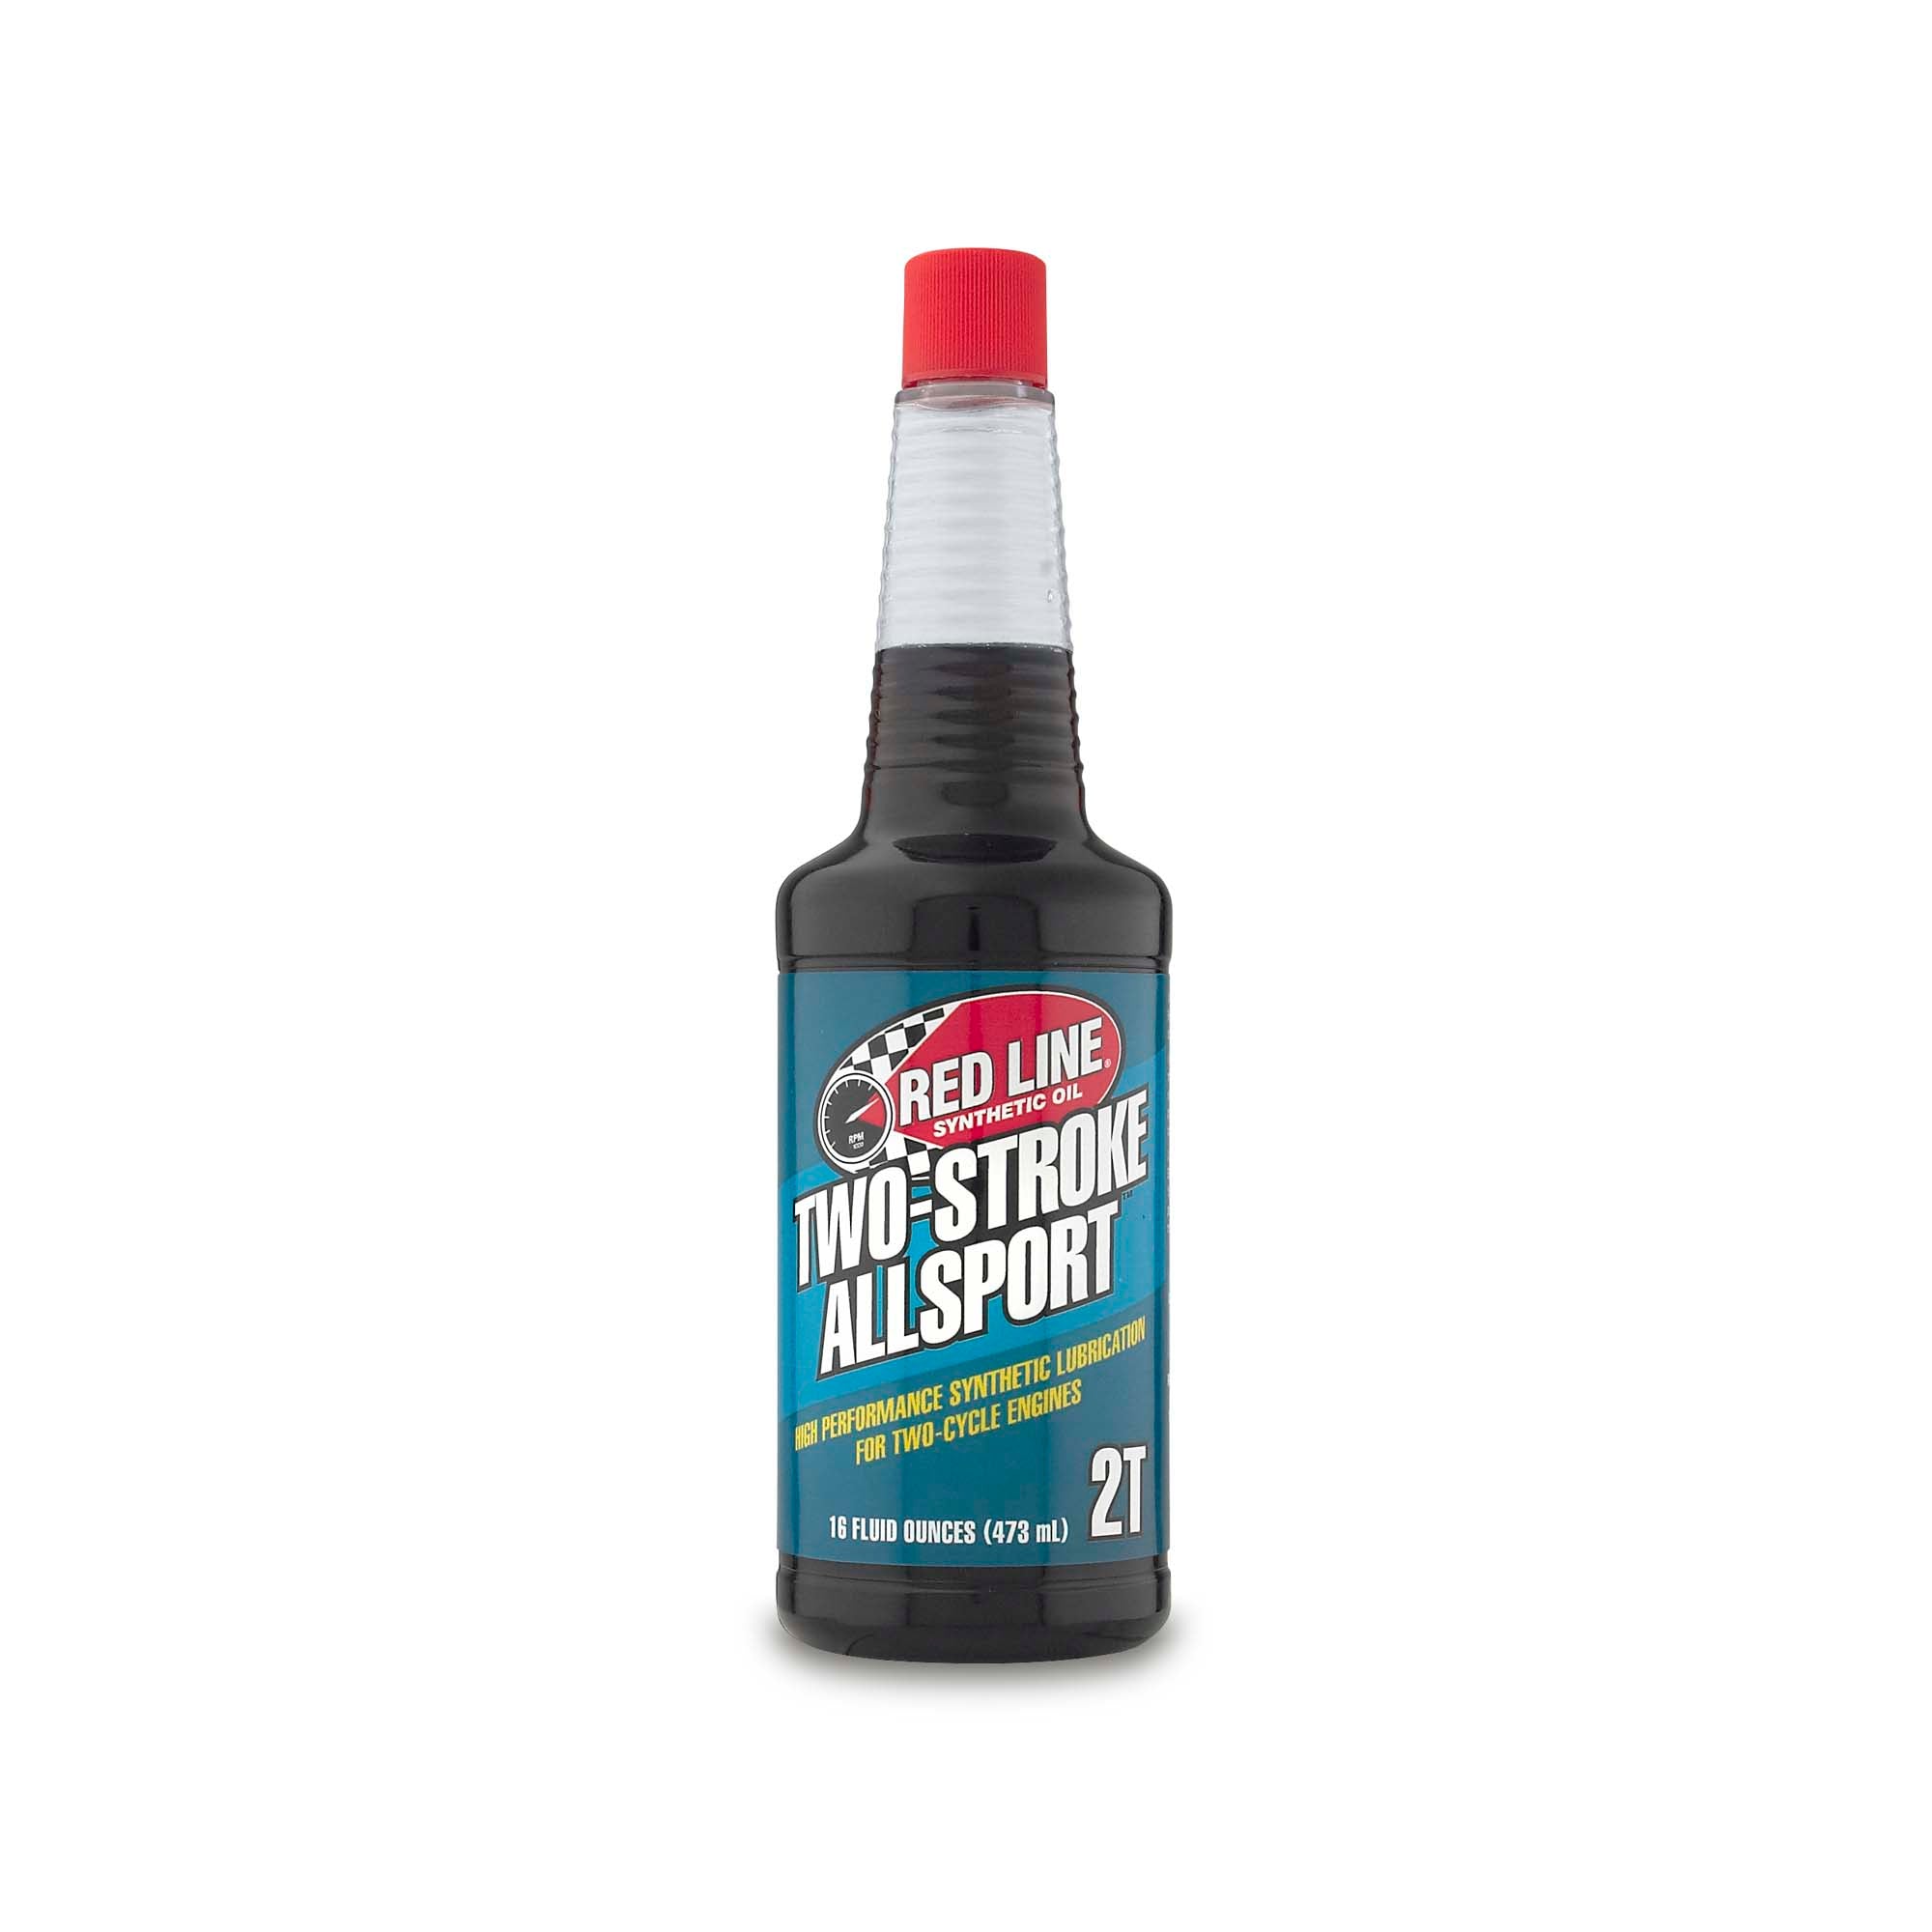 Red Line Two Stroke All Sport Oil